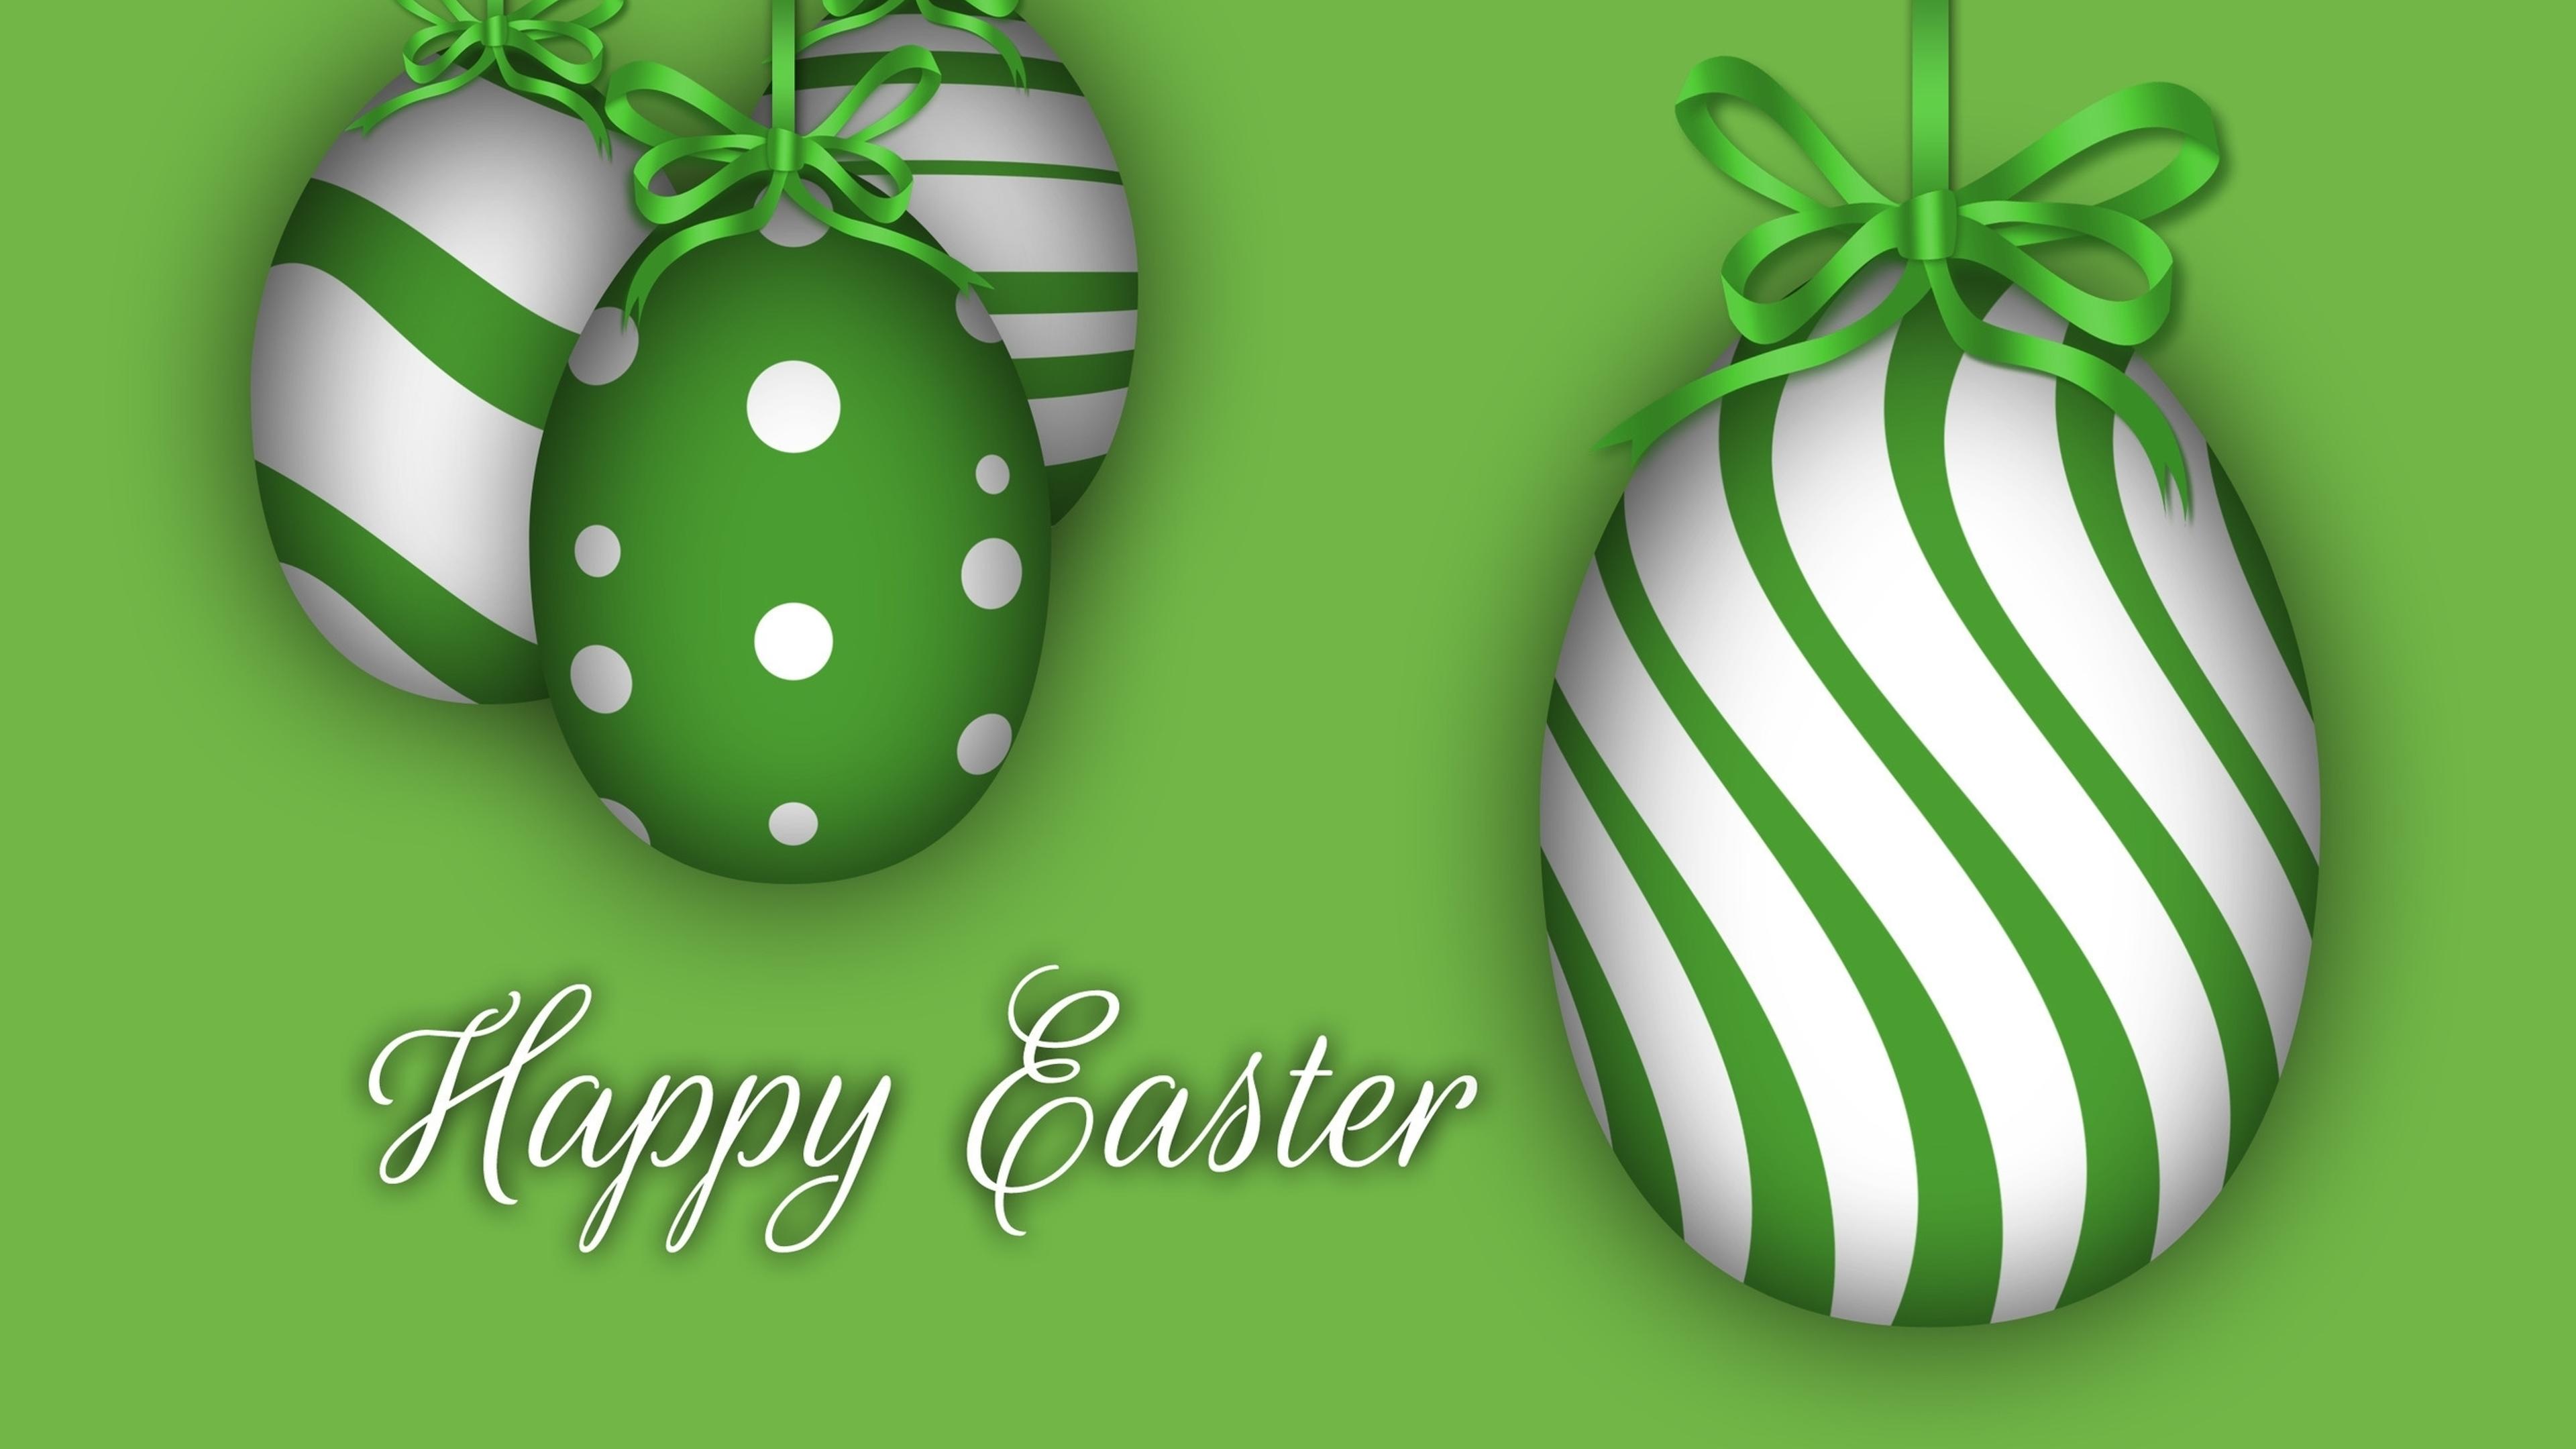 Download Happy Easter 2017 - Green Chocolate eggs 3840x2160.